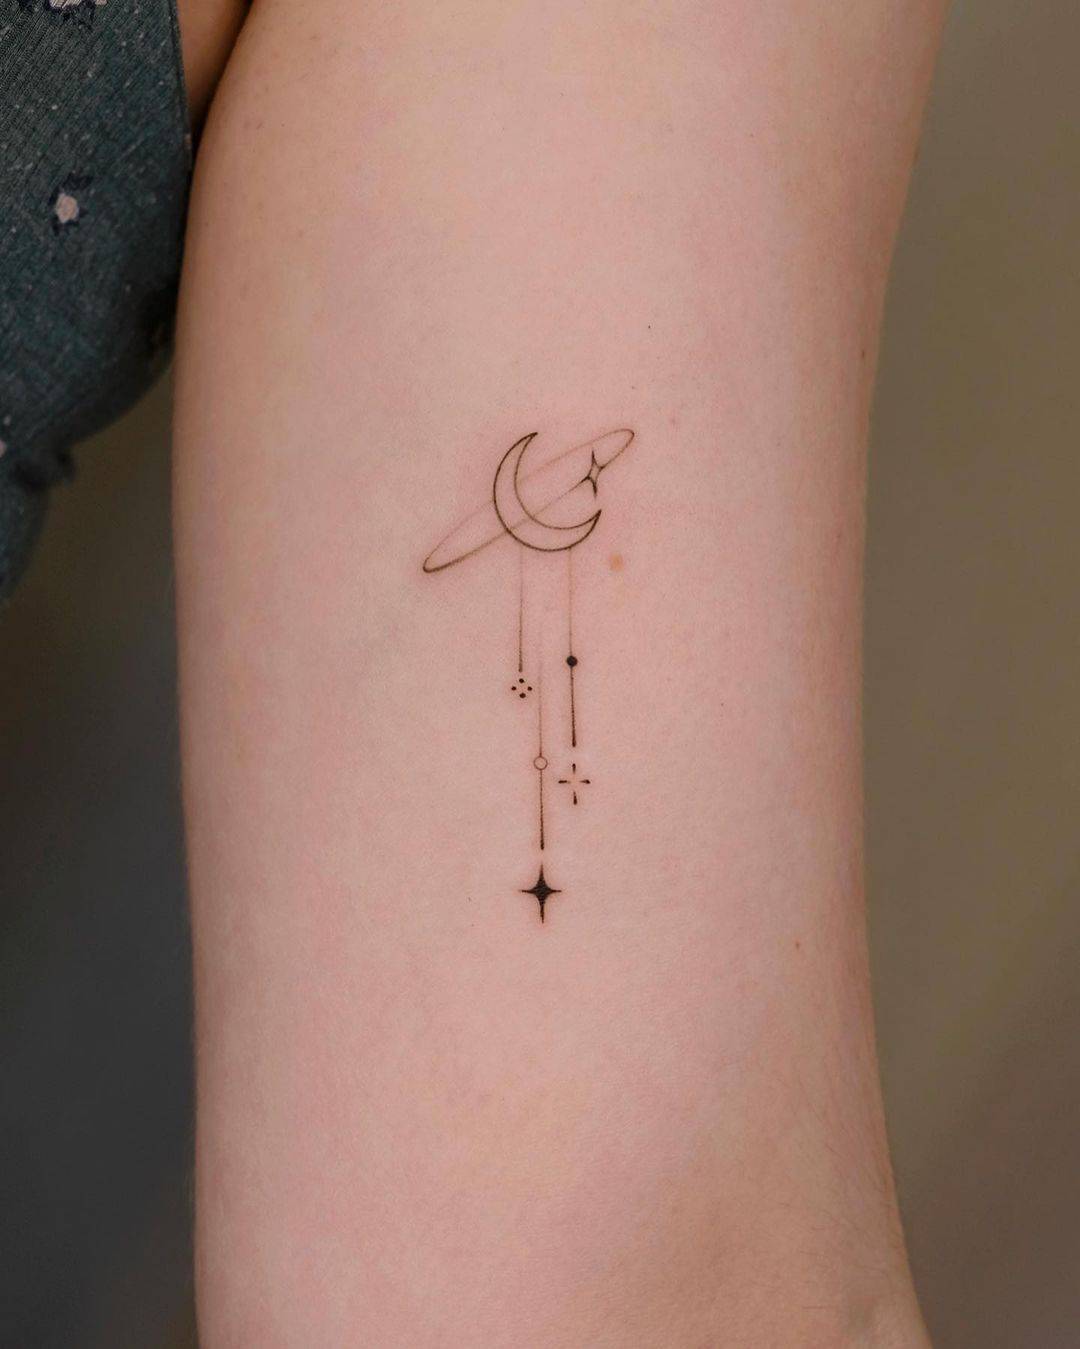 Subtle celestial transitions captured in ink: Different phases of moon... |  TikTok